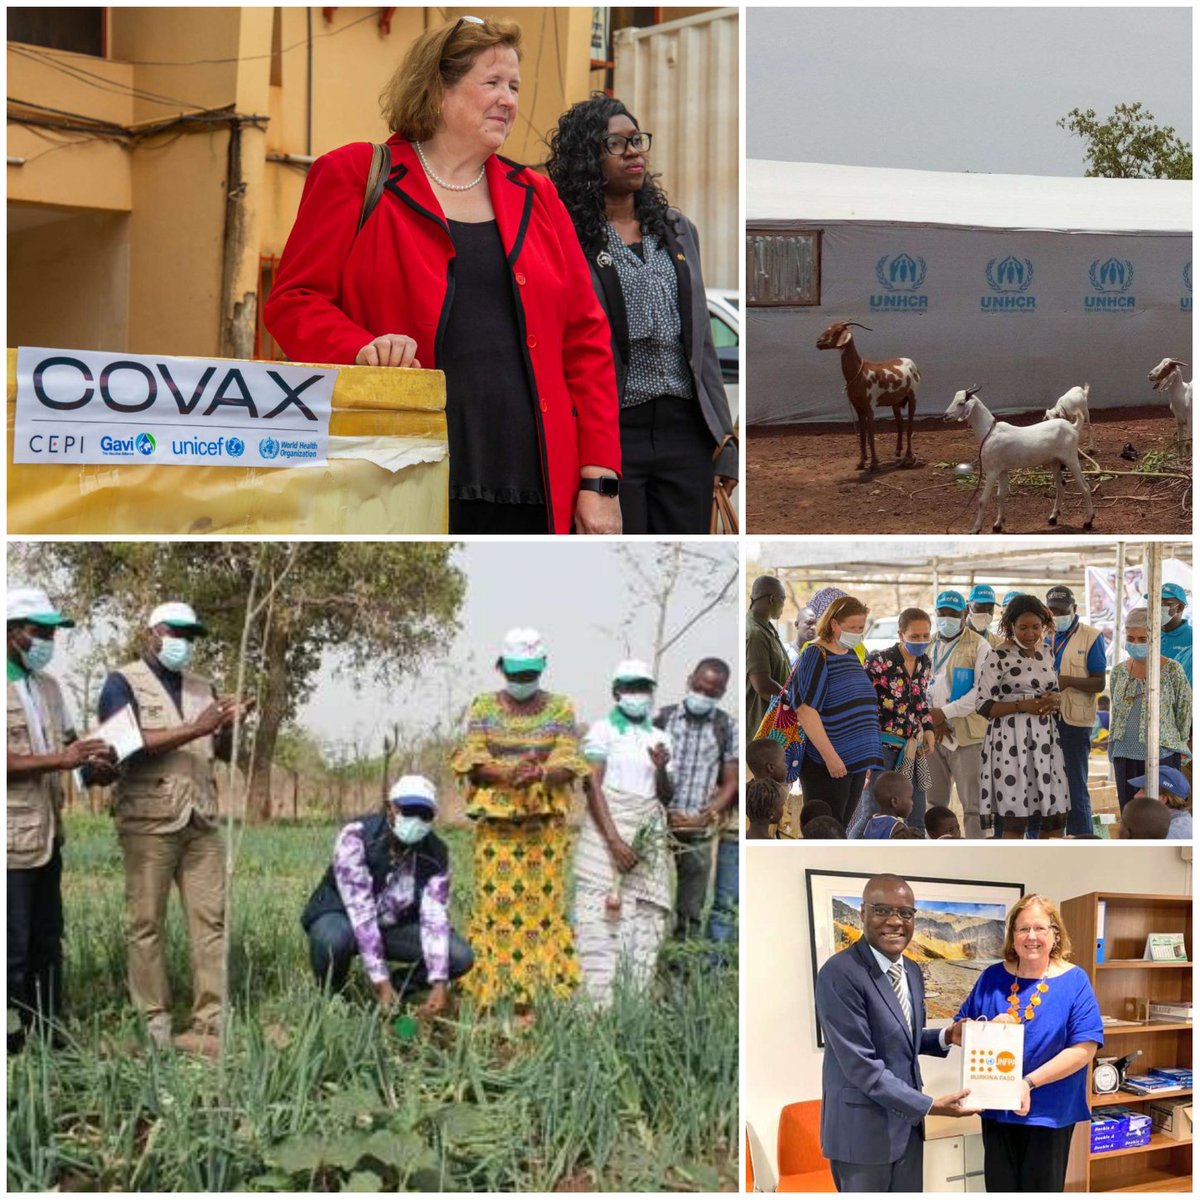 #UnitedNationsDay

United Nations are a key partner of 🇨🇦 in #BurkinaFaso

Humanitarian Food Security Education #ReproductiveAndSexualHealth #Covax Women's Empowerment #Peace building Security #HumanRights

Canada acknowledges the essential role of 🇺🇳 in 🇧🇫 #Agenda2030